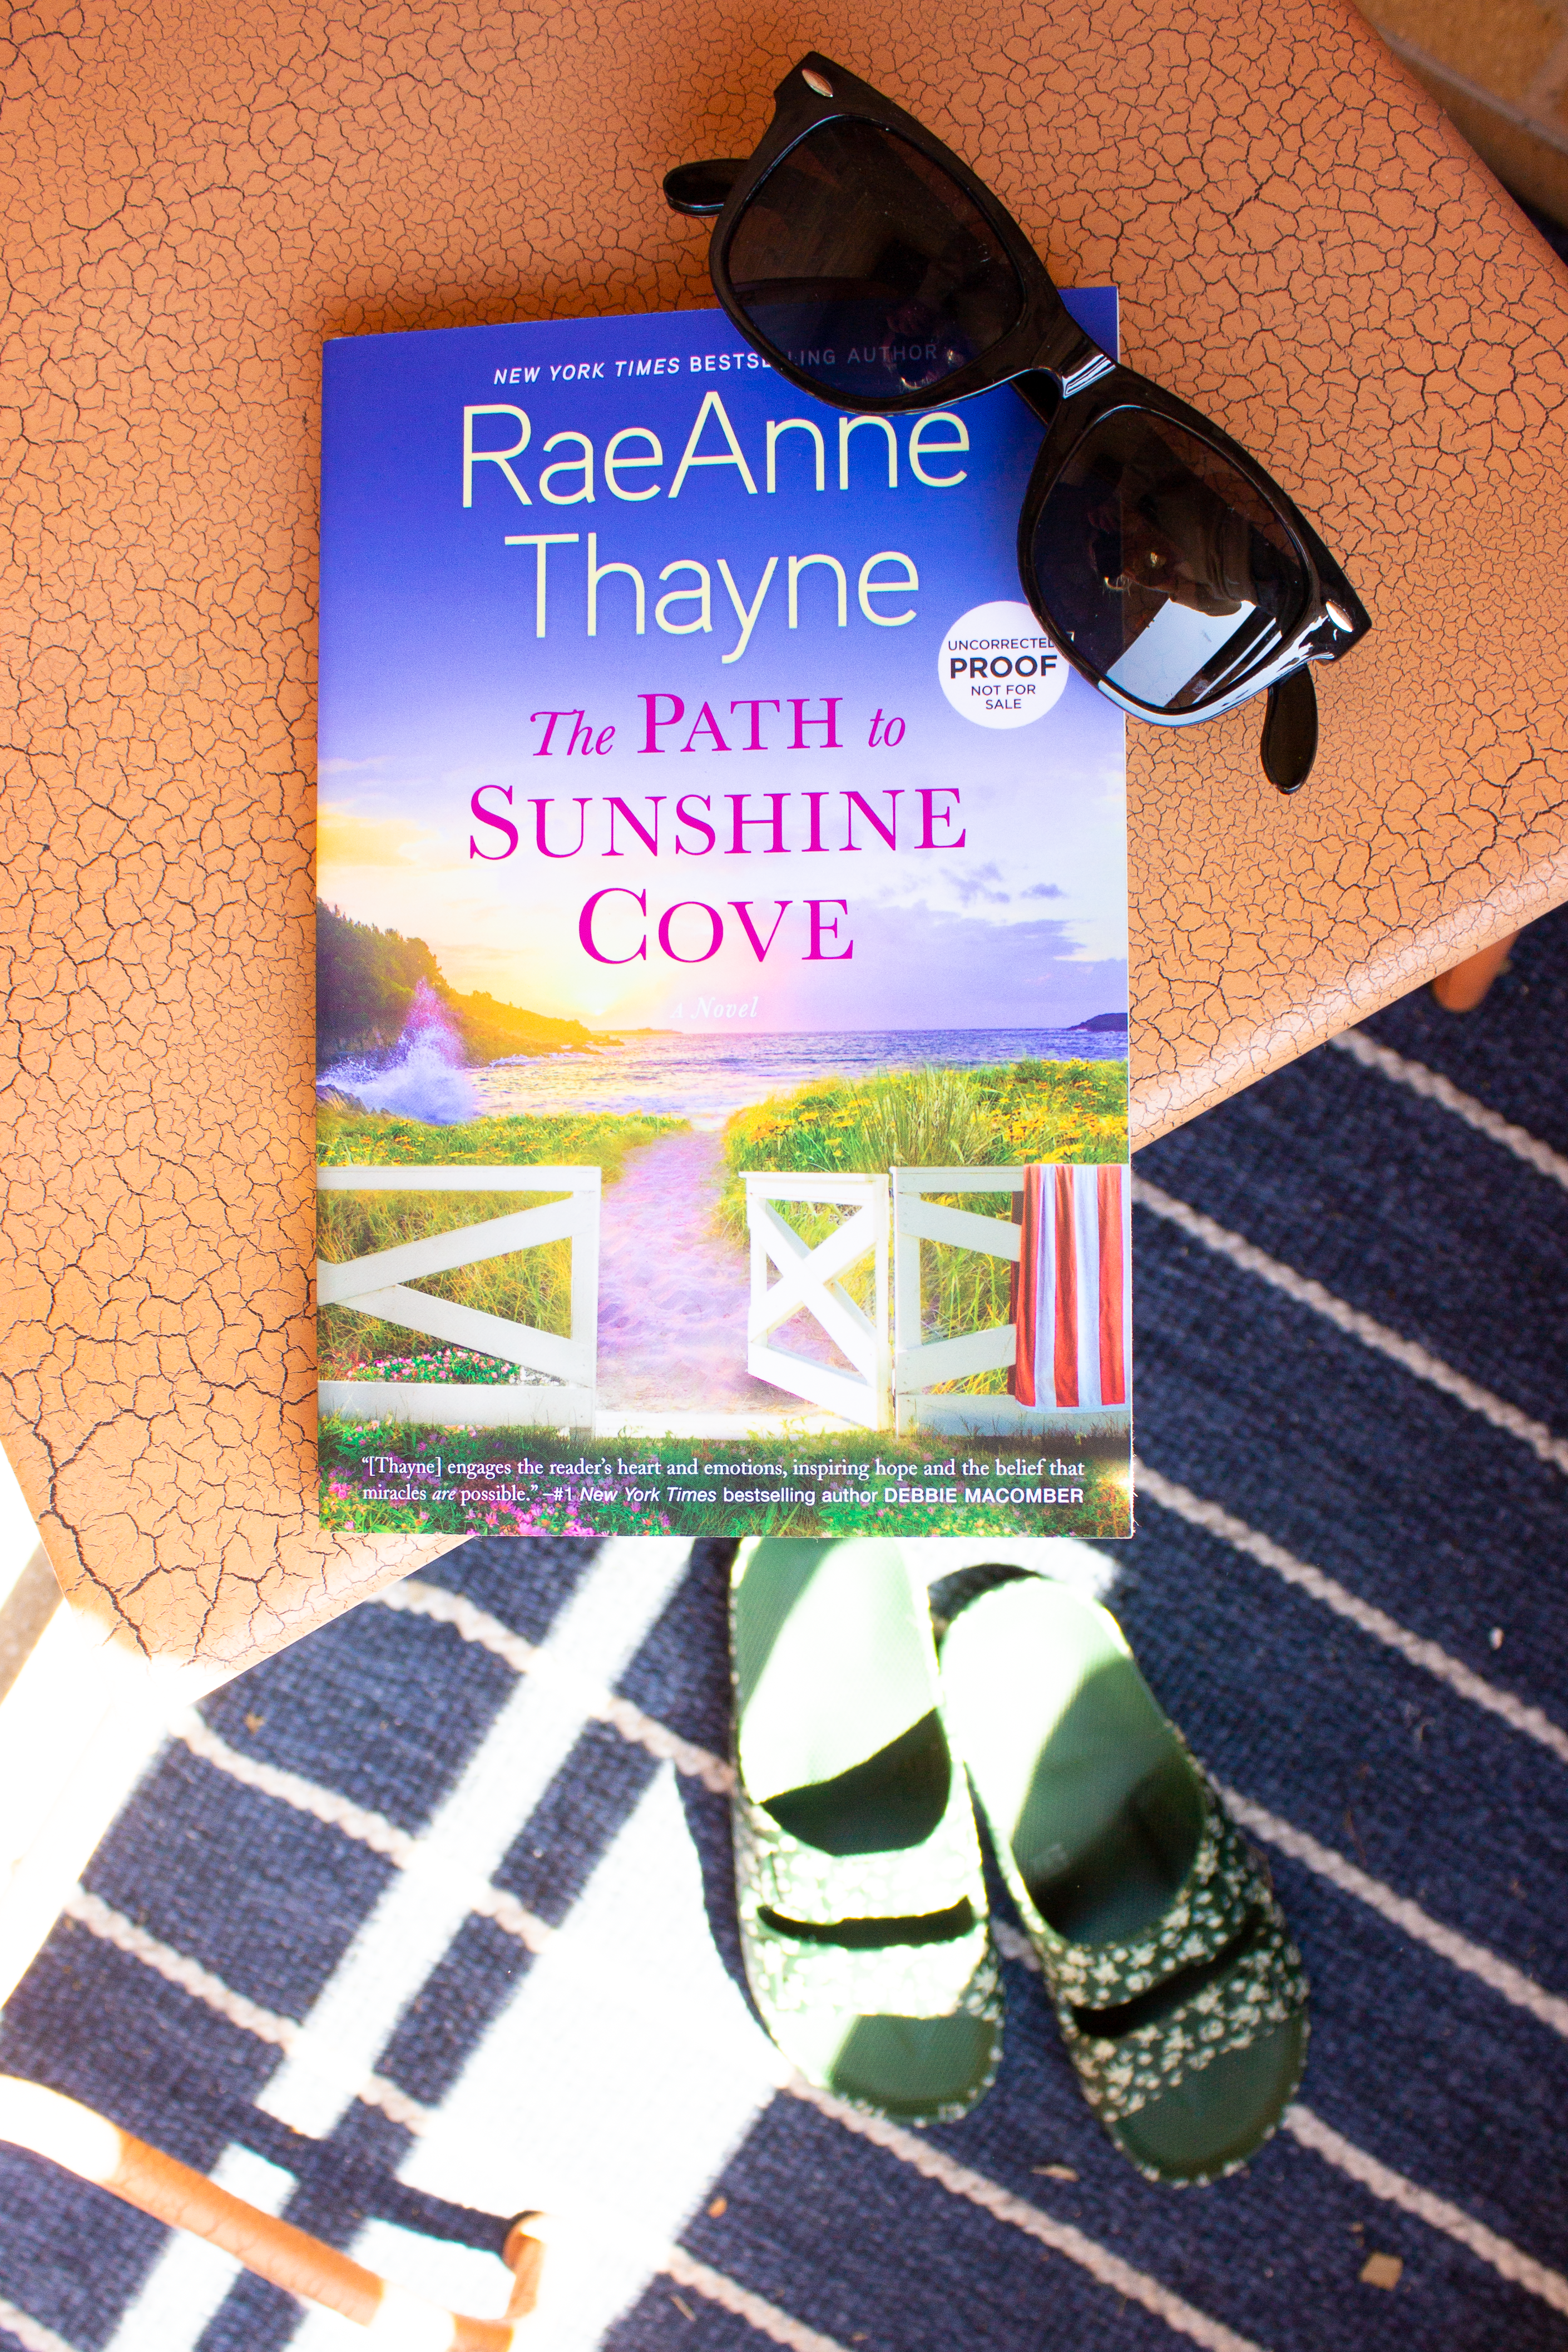 THE PATH TO SUNSHINE COVE by RaeAnne Thayne, spring books